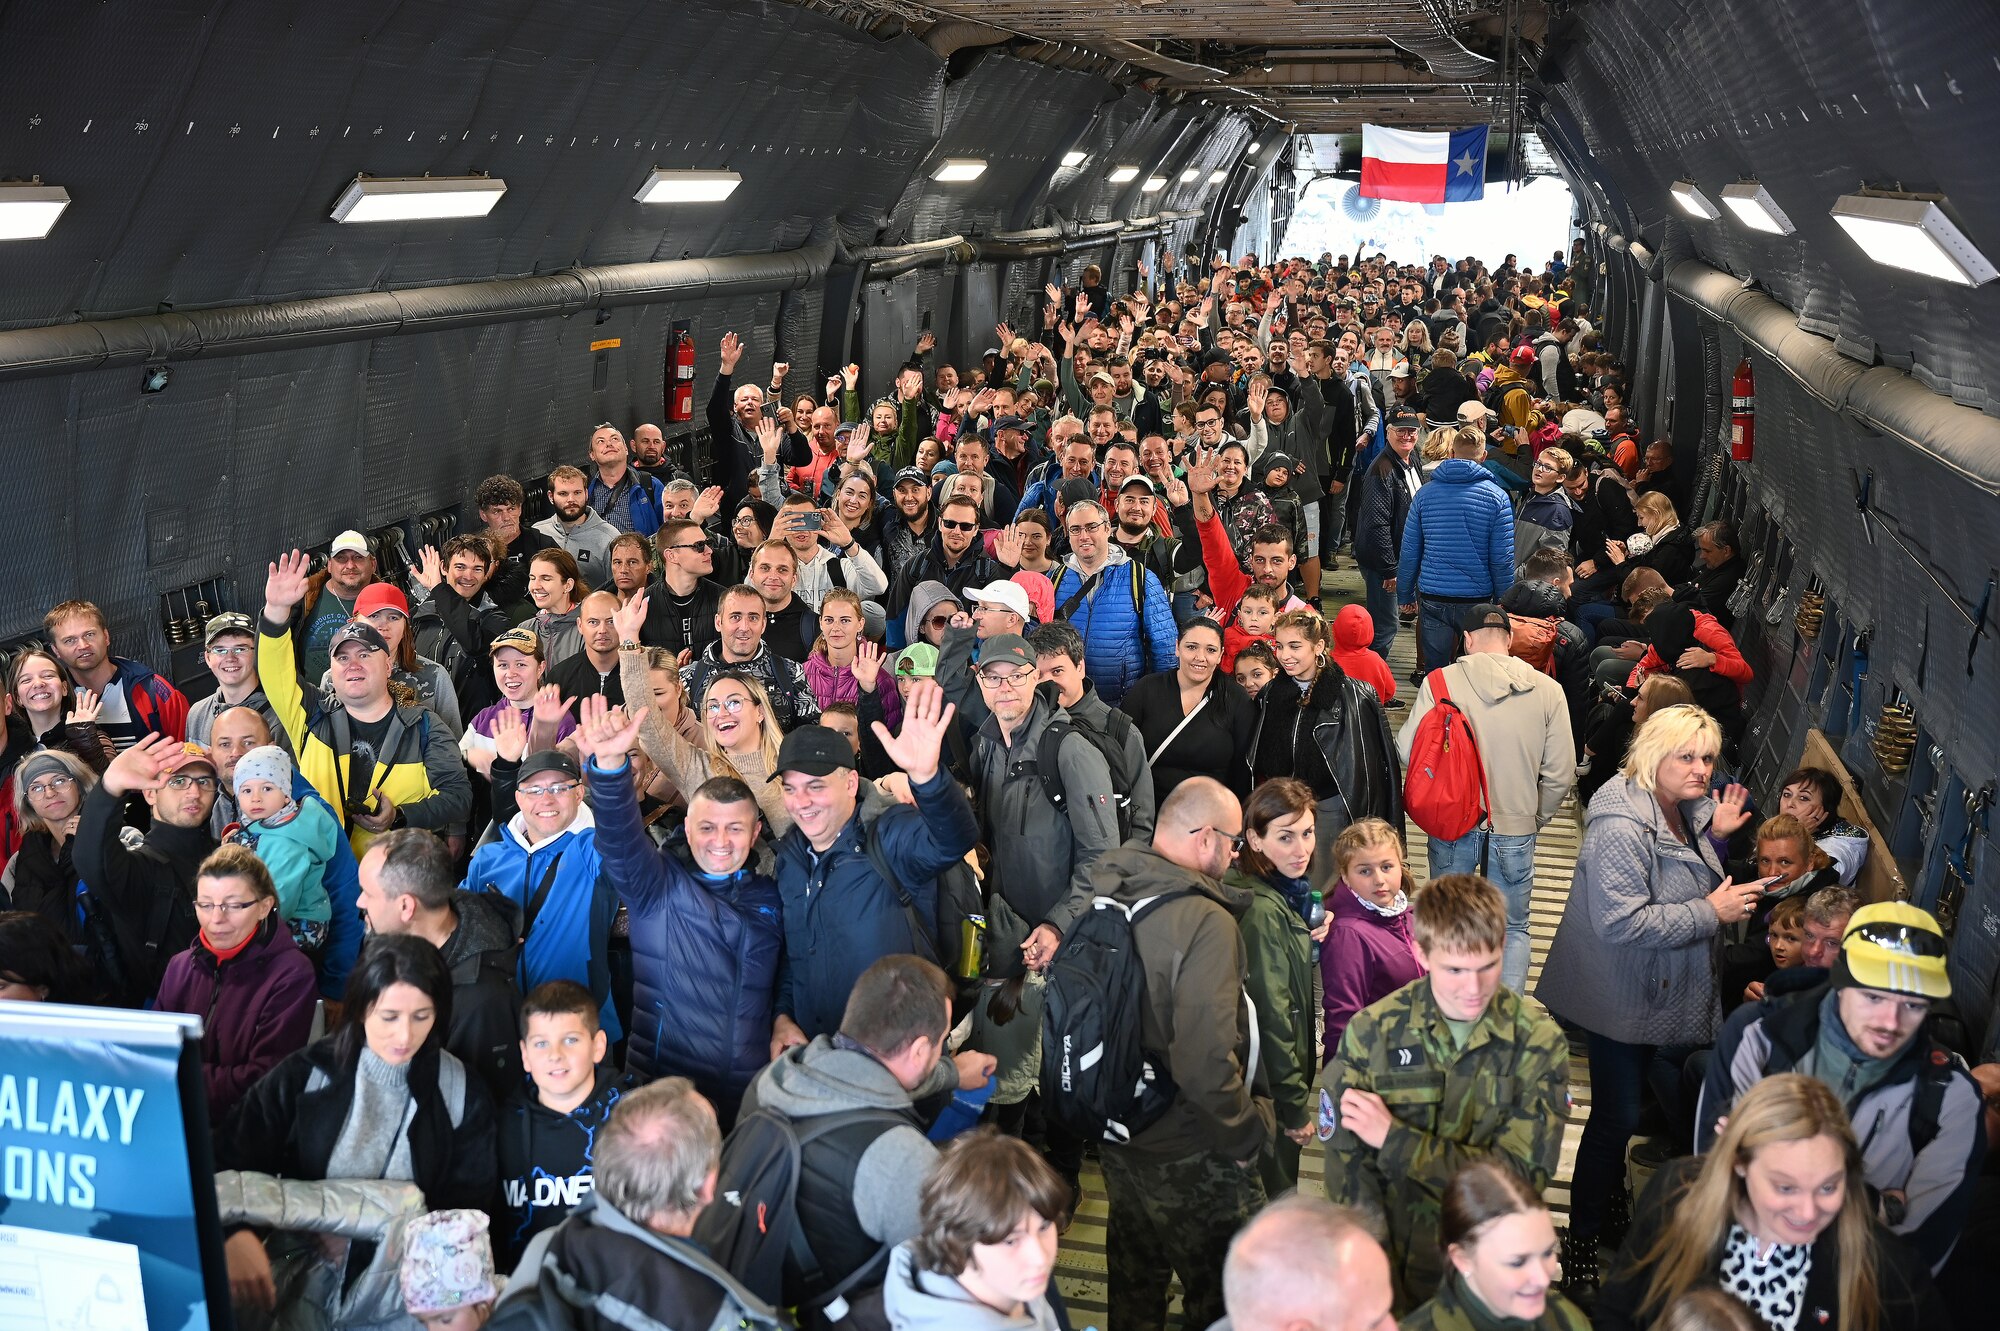 NATO Days air show participants smile and wave as they walk through a C-5M Super Galaxy aircraft in Ostrava, Czech Republic Sept. 17, 2022. The C-5M was the largest aircraft on display during the two-day event. (U.S. Air Force photo by Staff Sgt. Monet Villacorte)